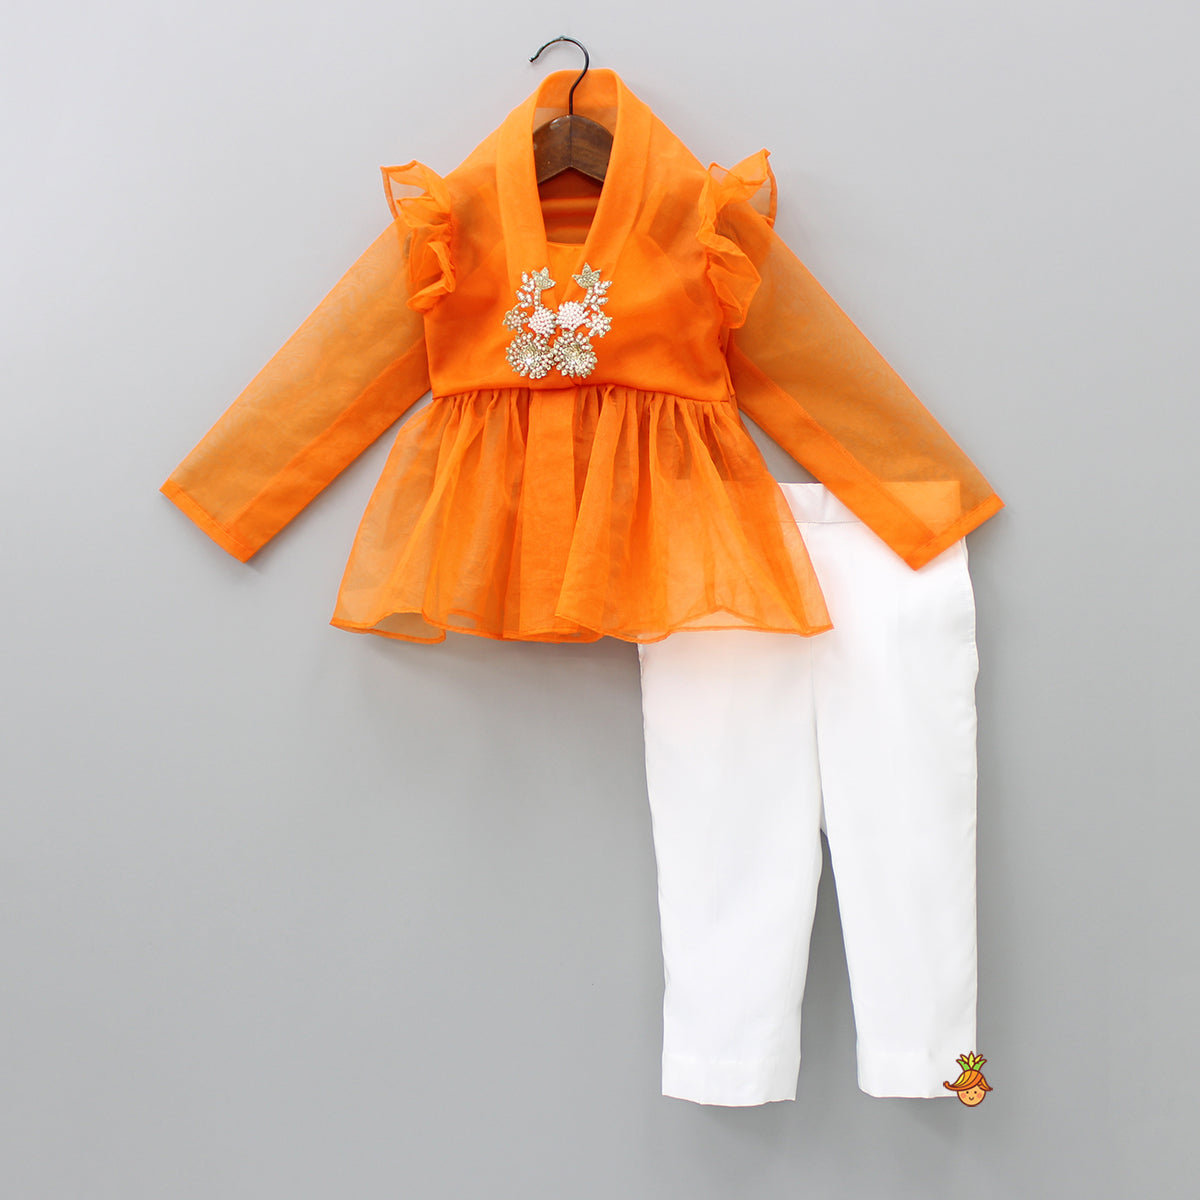 Embroidered Yoke Orange Organza Top With Pockets Detail White Pant